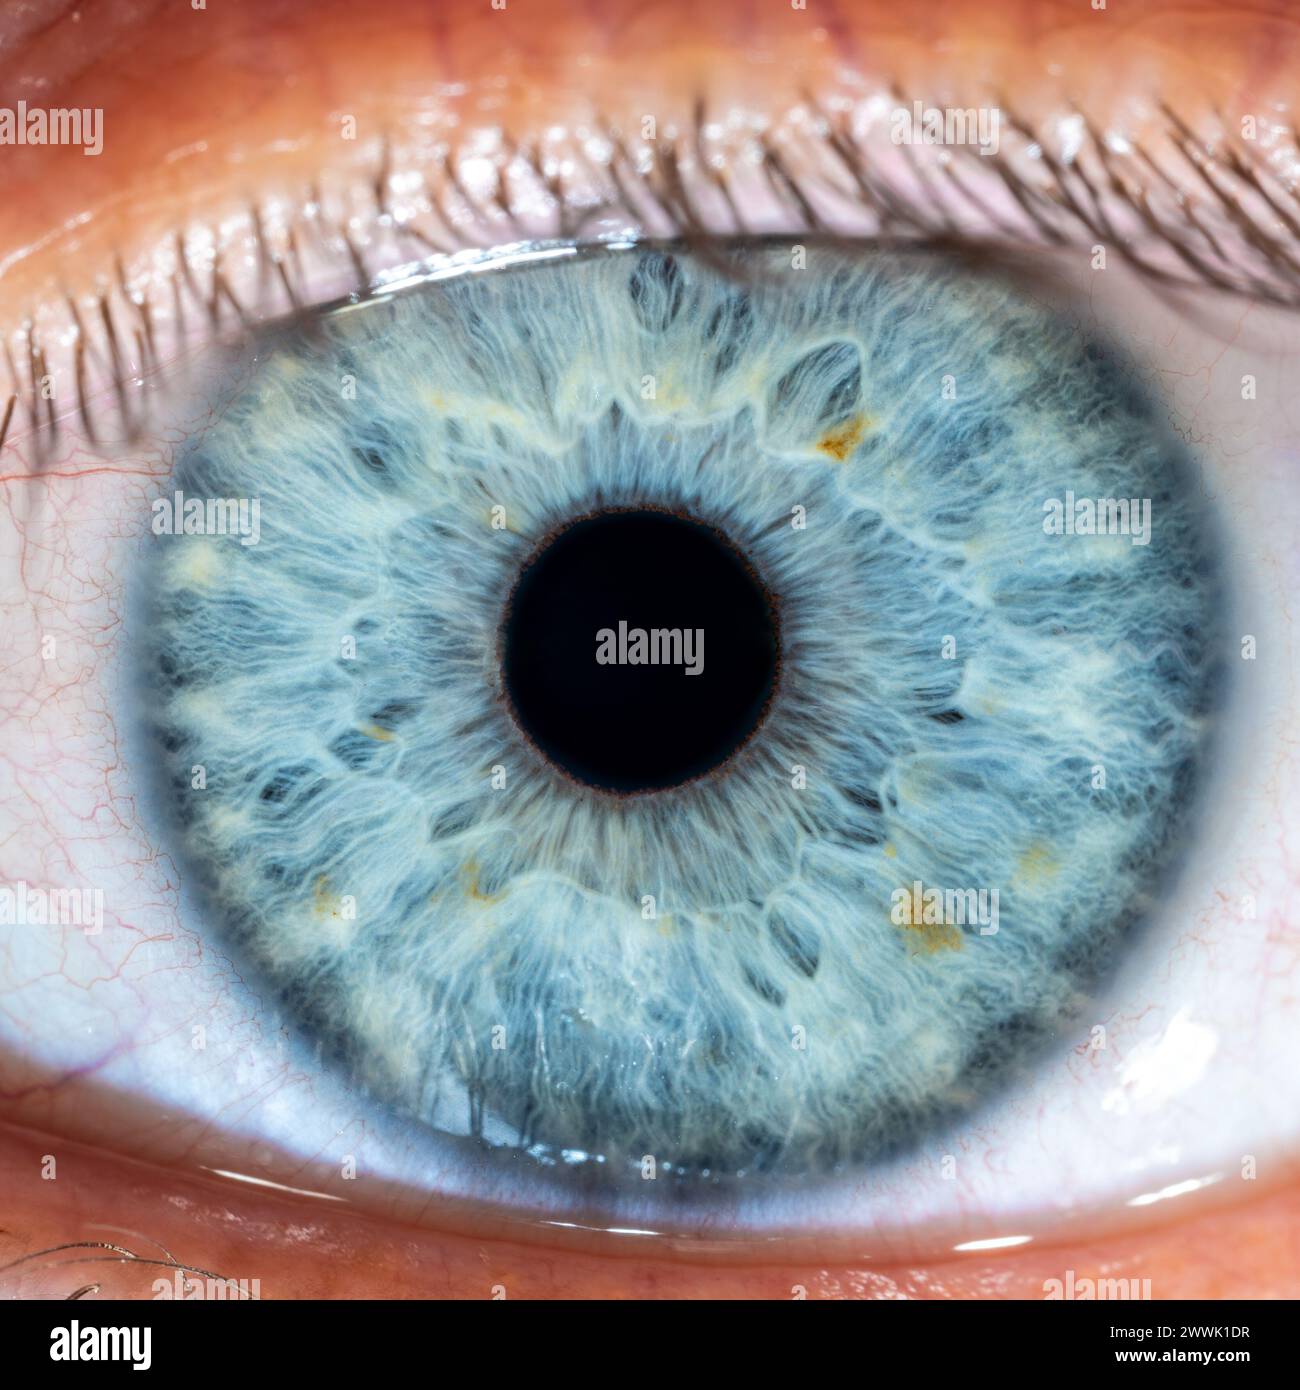 Description: High Resolution male Blue Colored Eye with Yellow Pigment Spots and Pupil Wide Open. Close Up. Structural Anatomy. Human Iris. Macro Deta Stock Photo